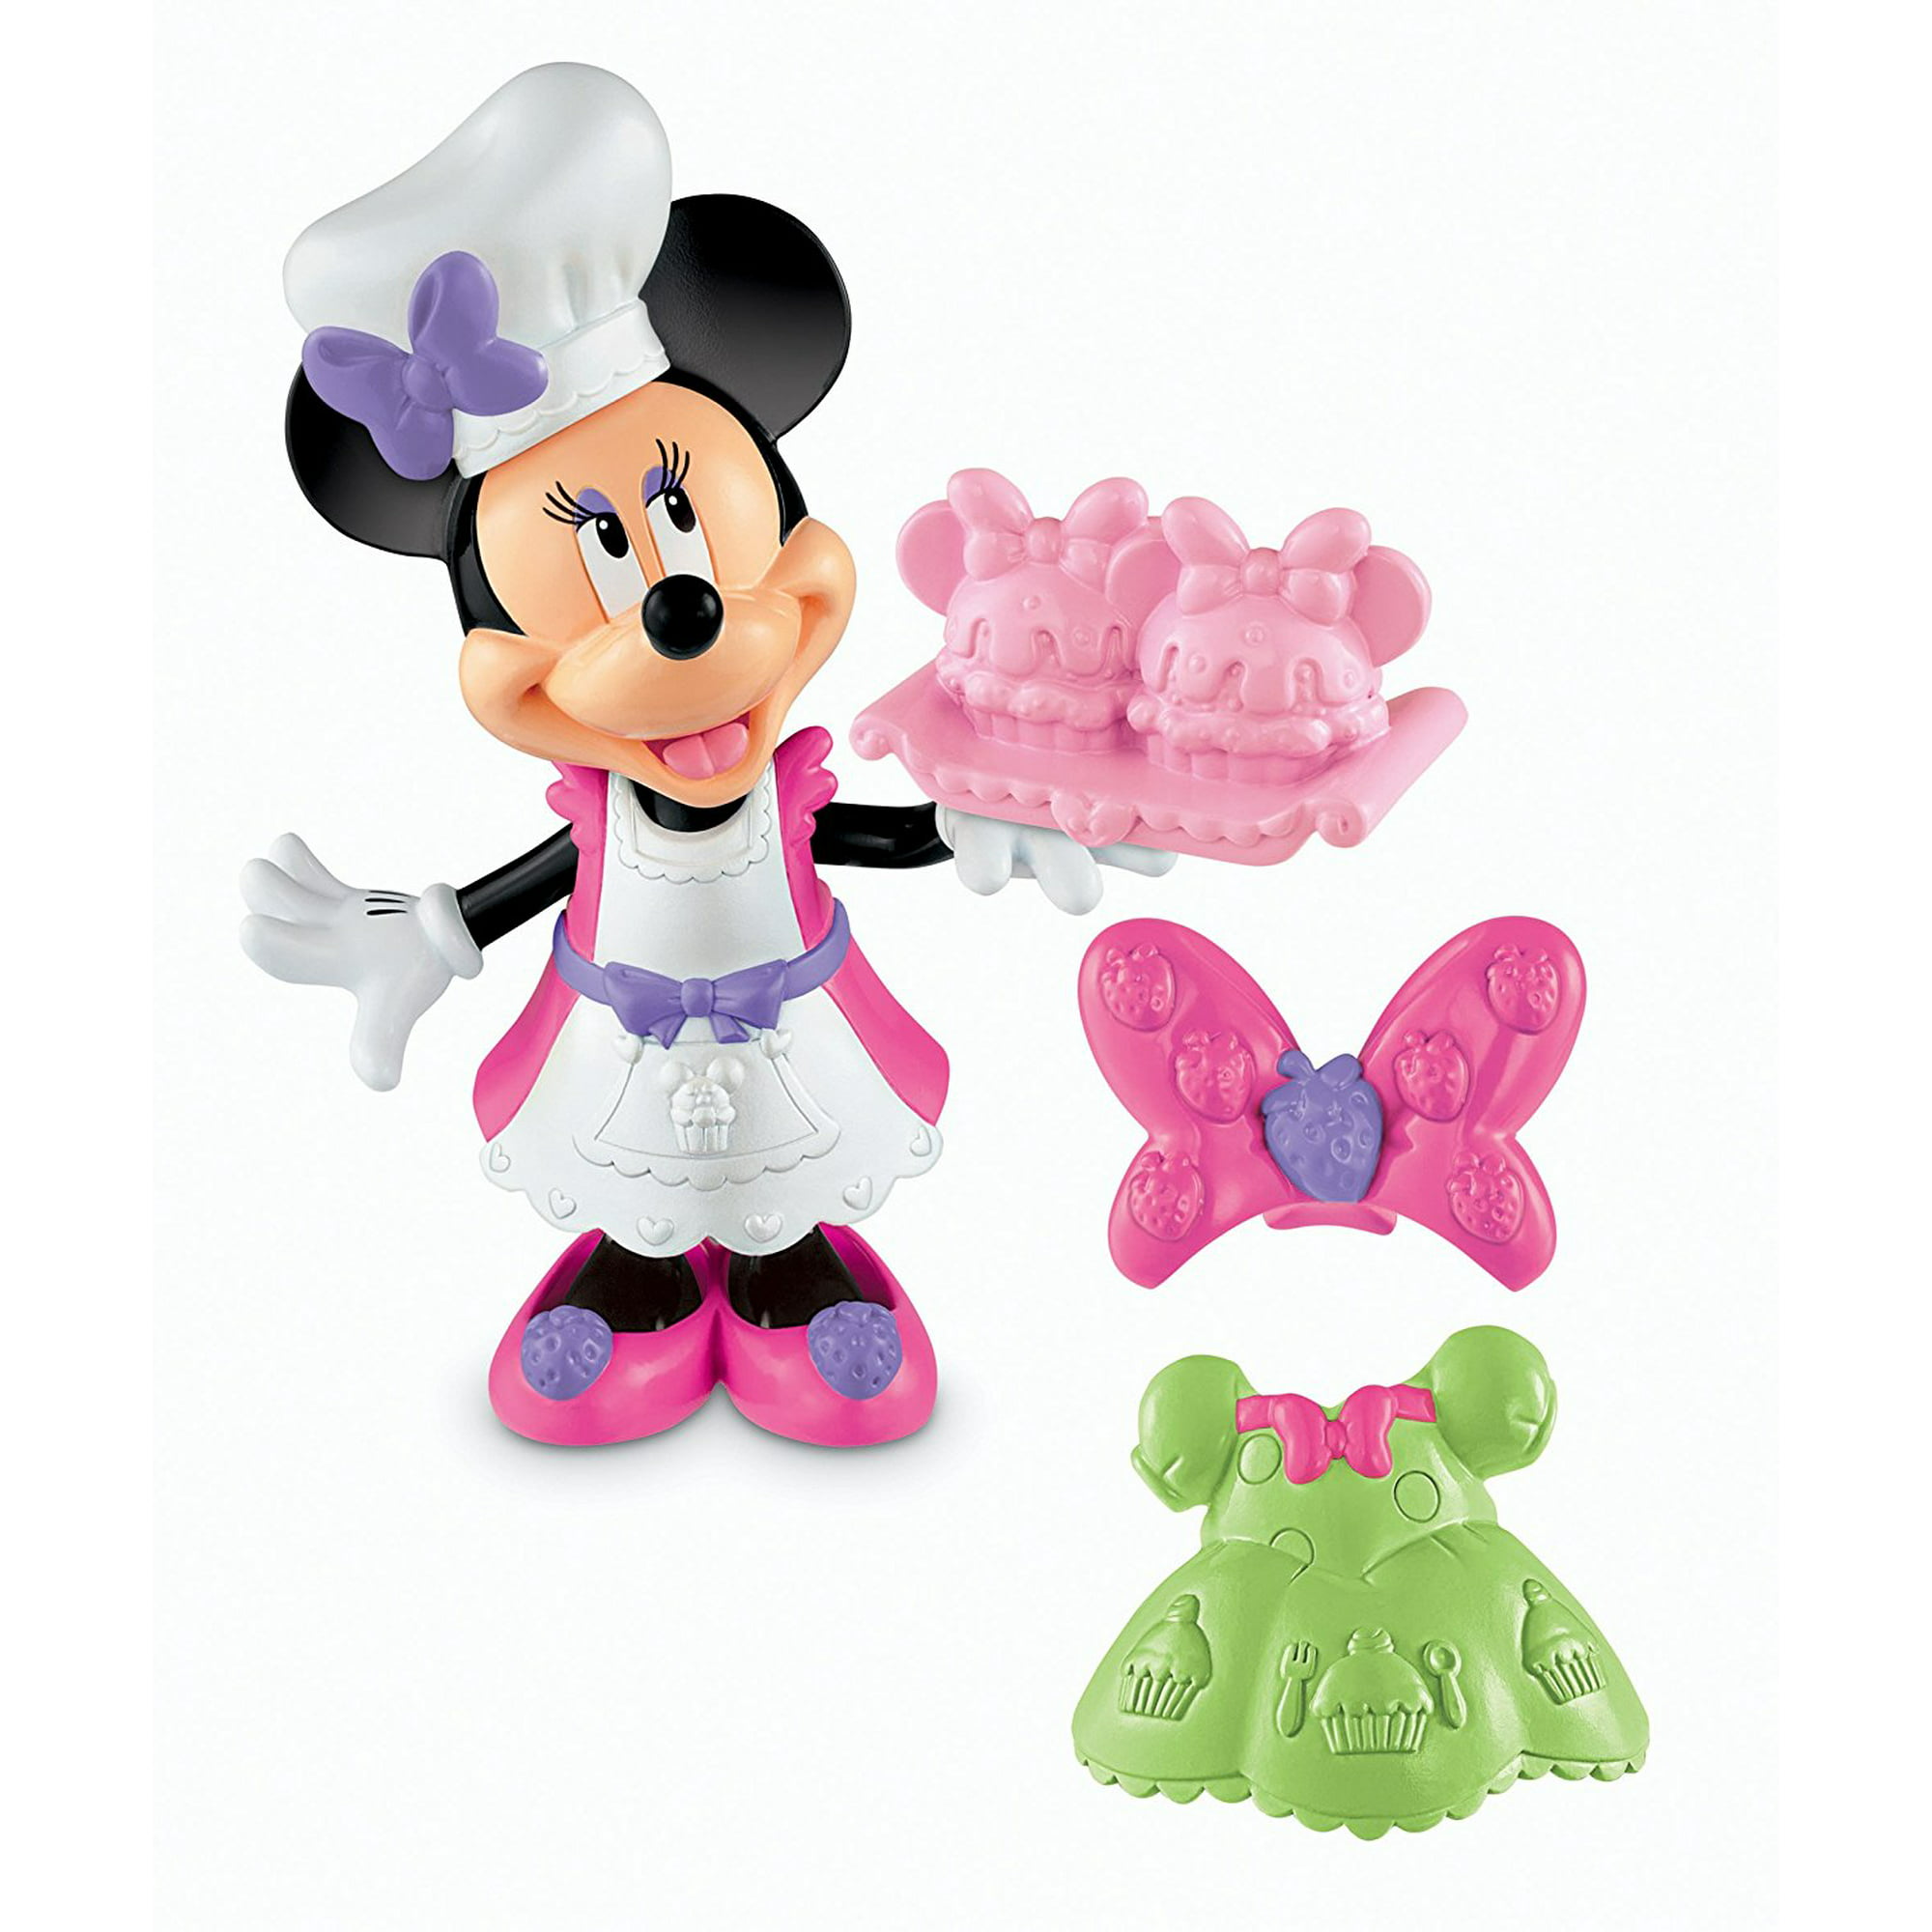 Fisher-Price Disney's Minnie's Cupcake Bowtique - Dress Minnie like a  Cupcake Baker with Easy Snap-on Outfits